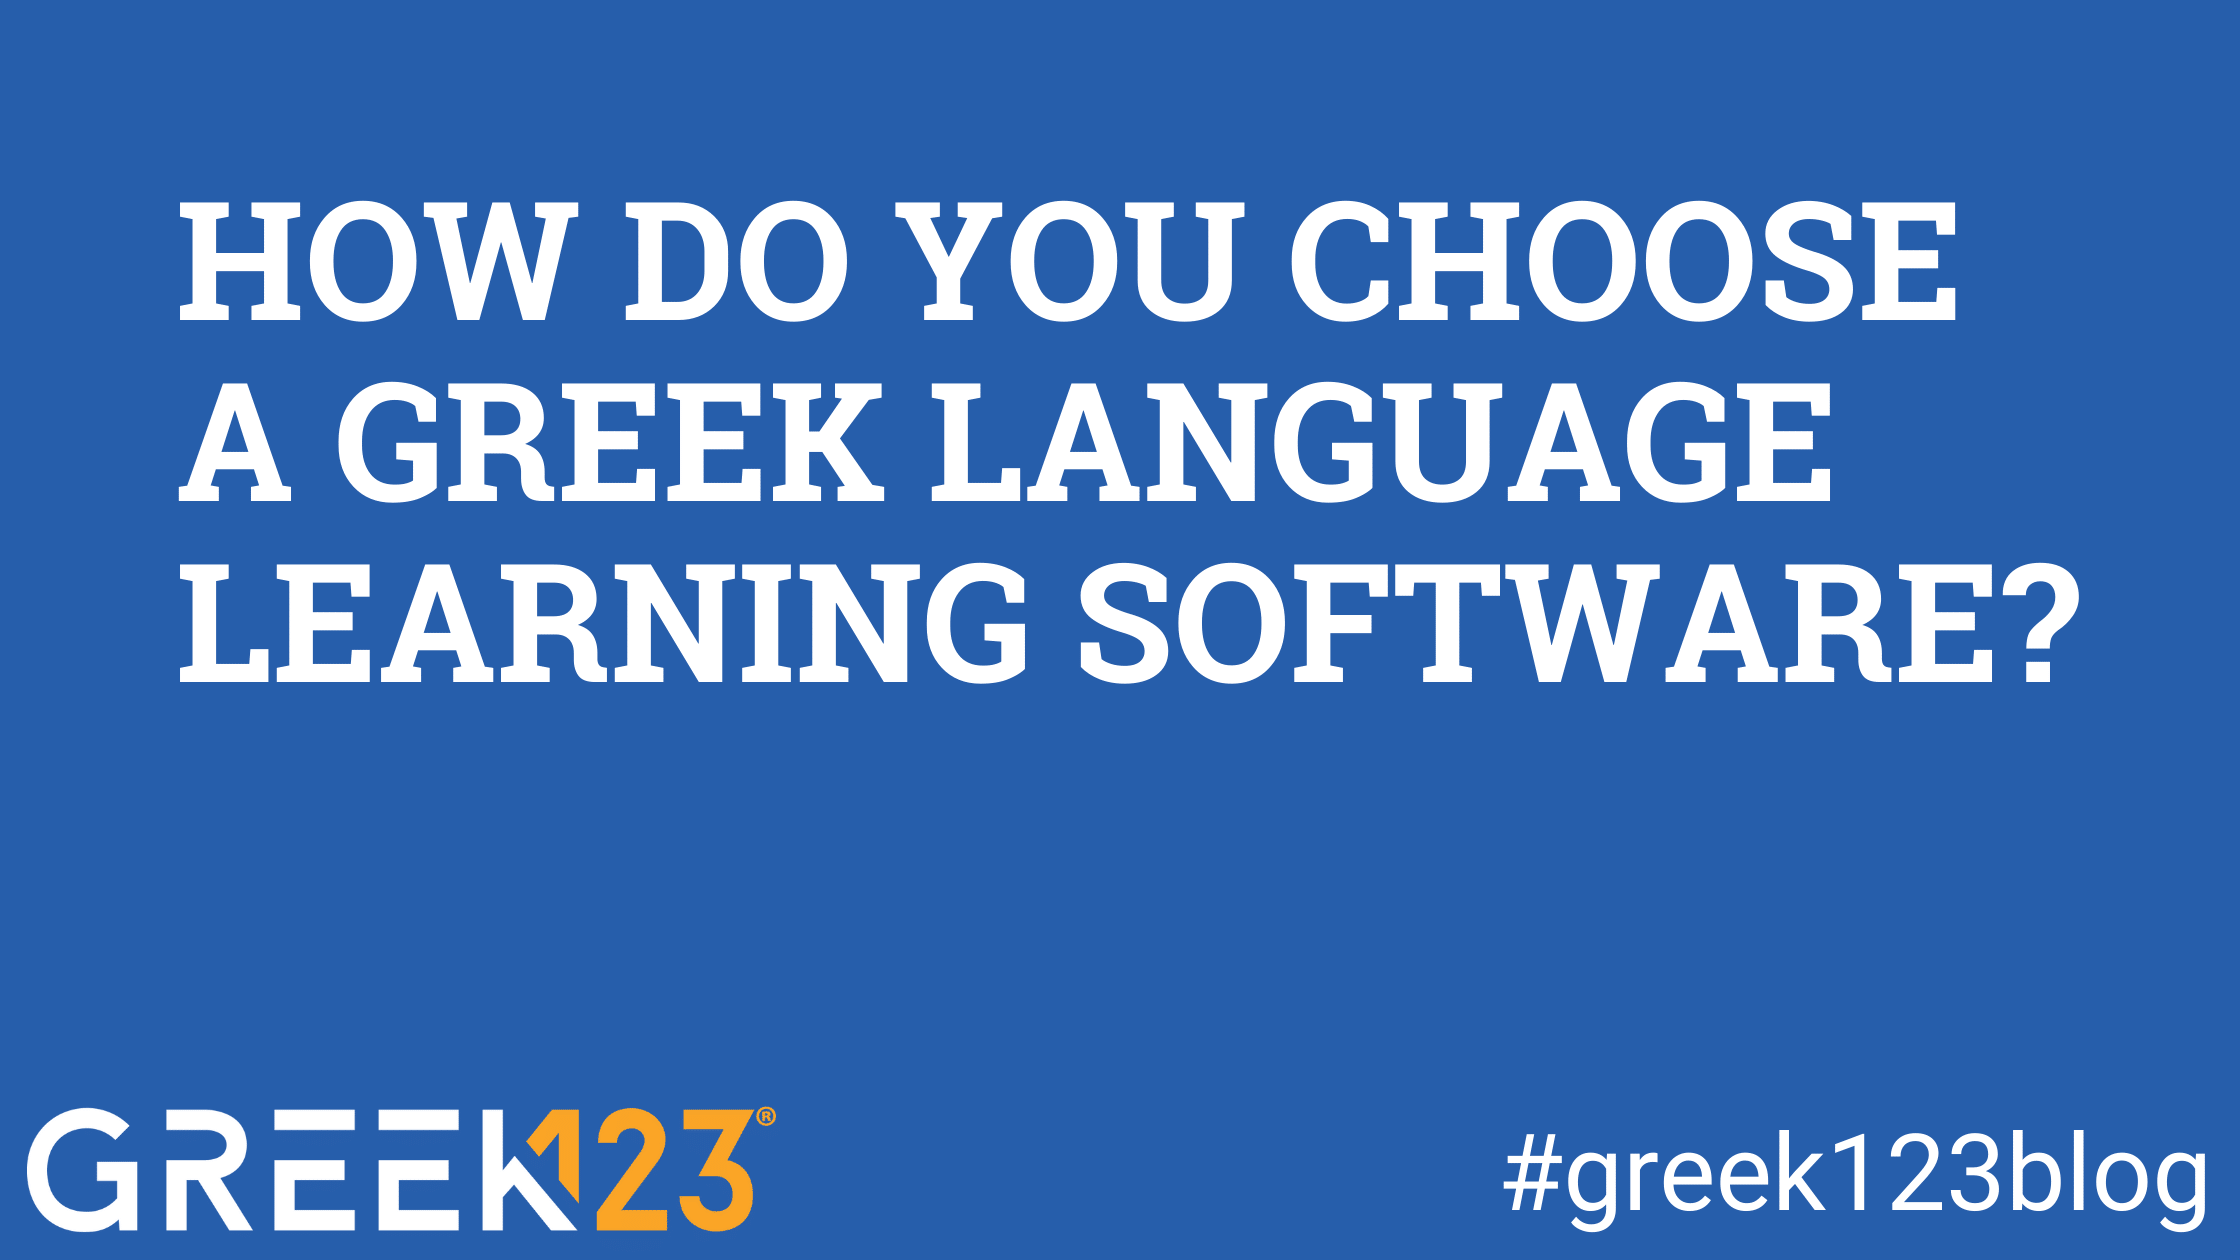 How do you choose a Greek language learning software?